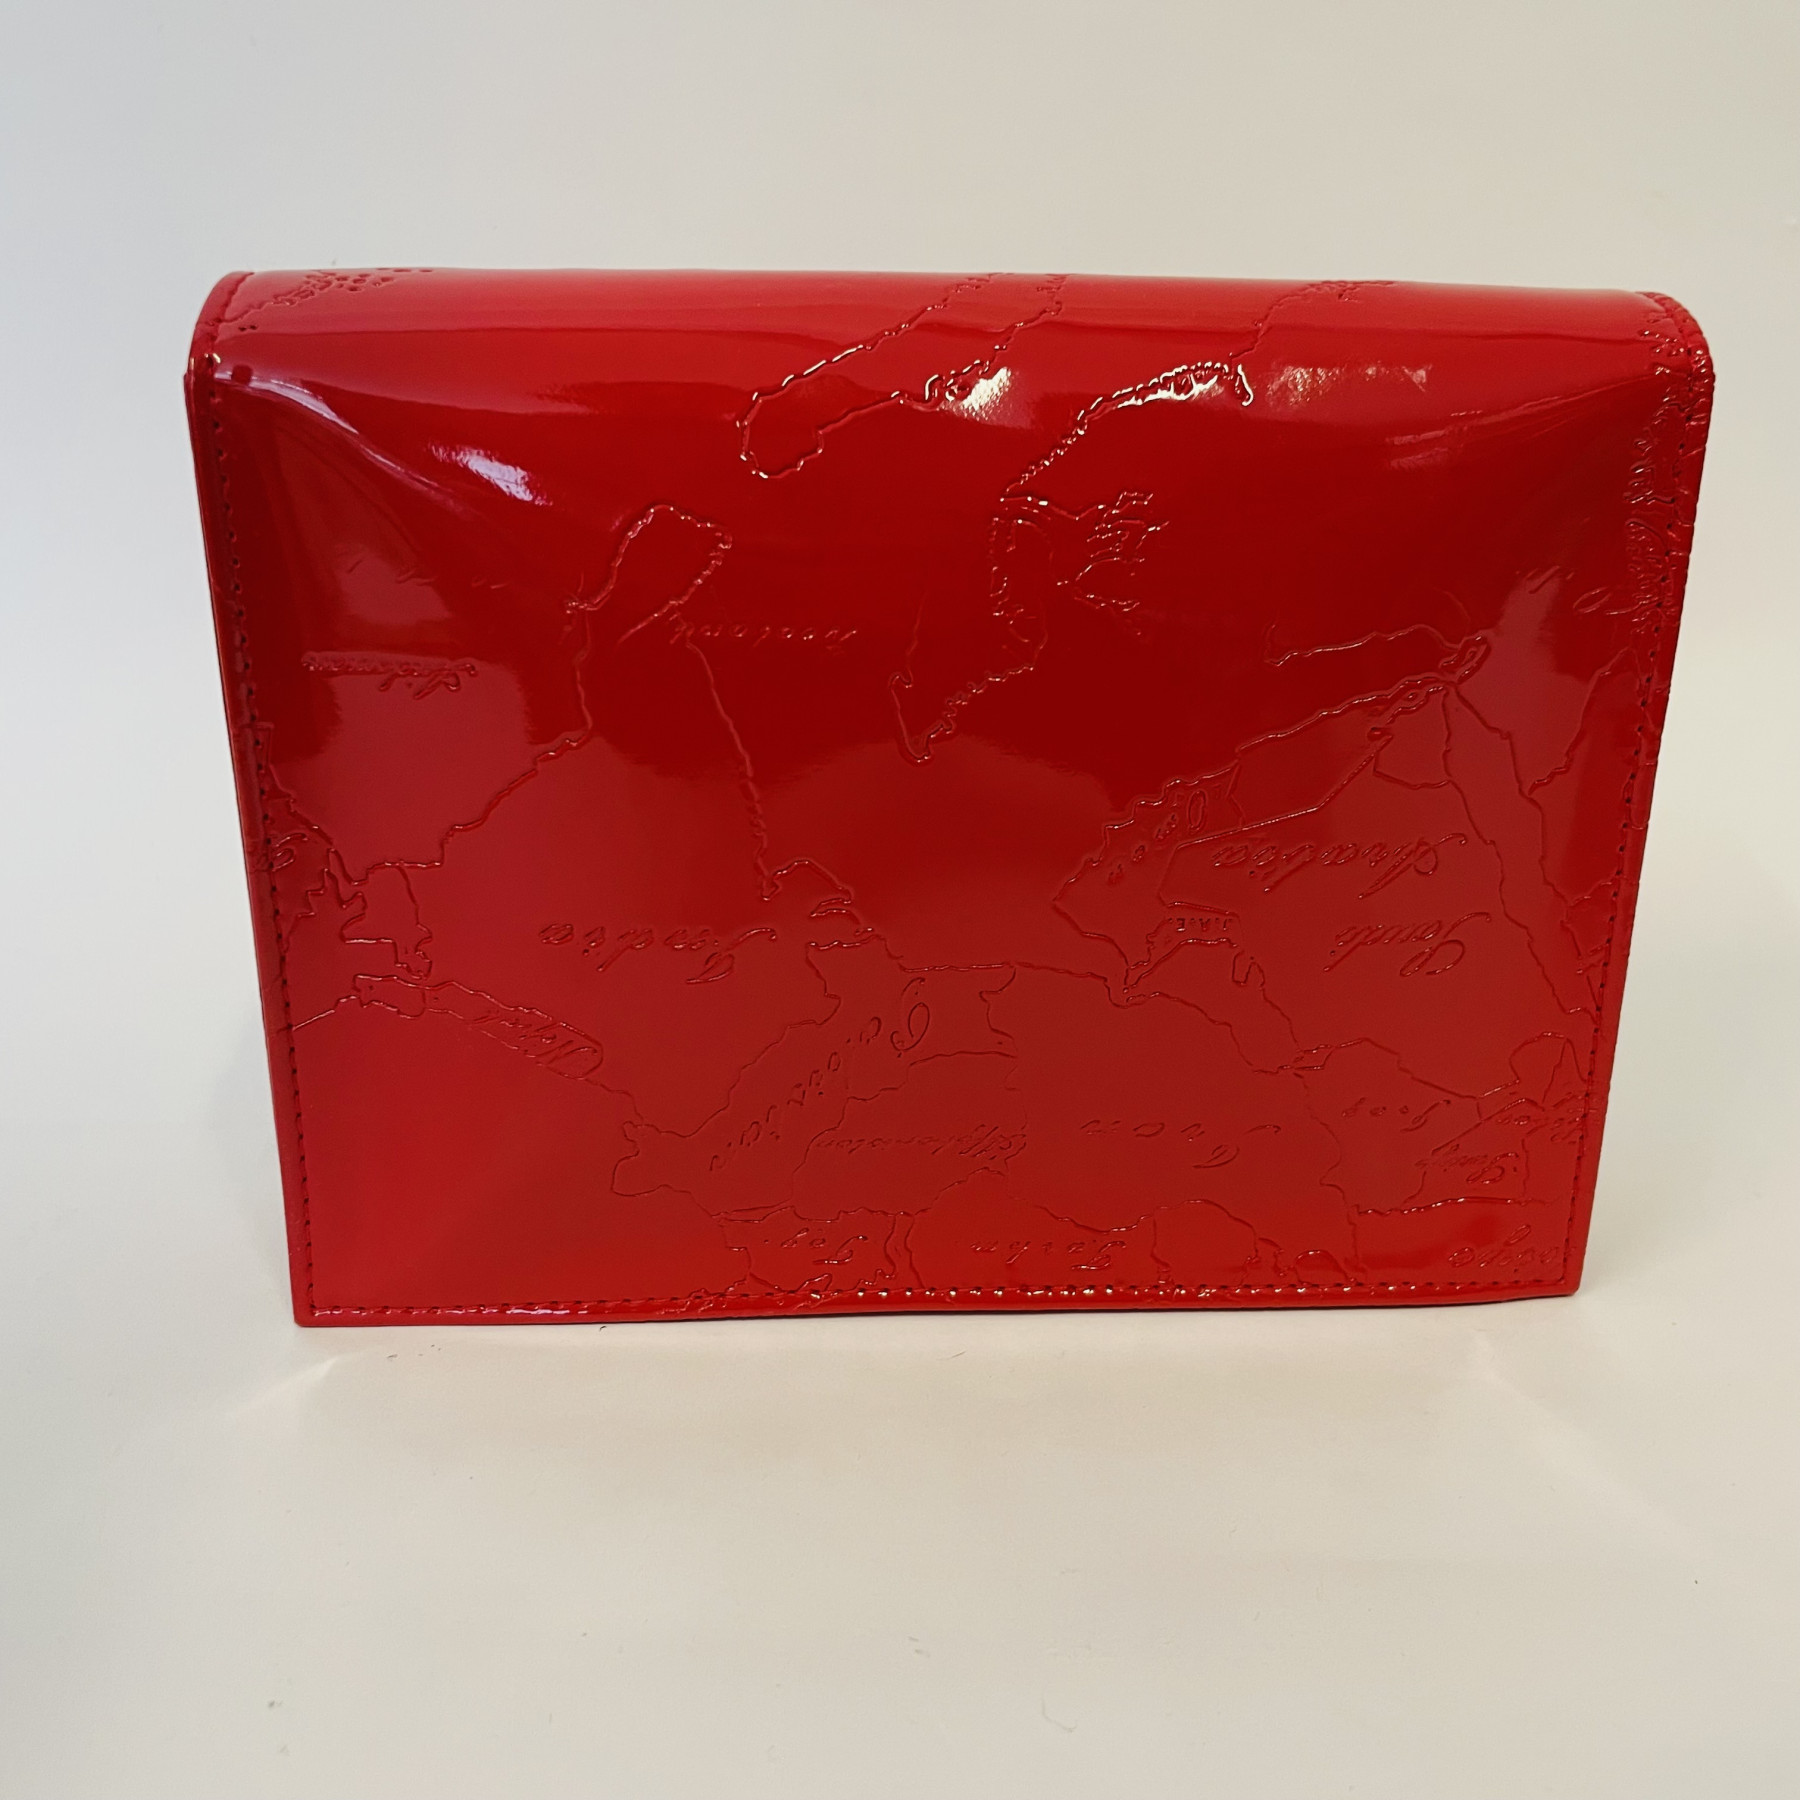 SMALL CASE RUBY RED VERNICE